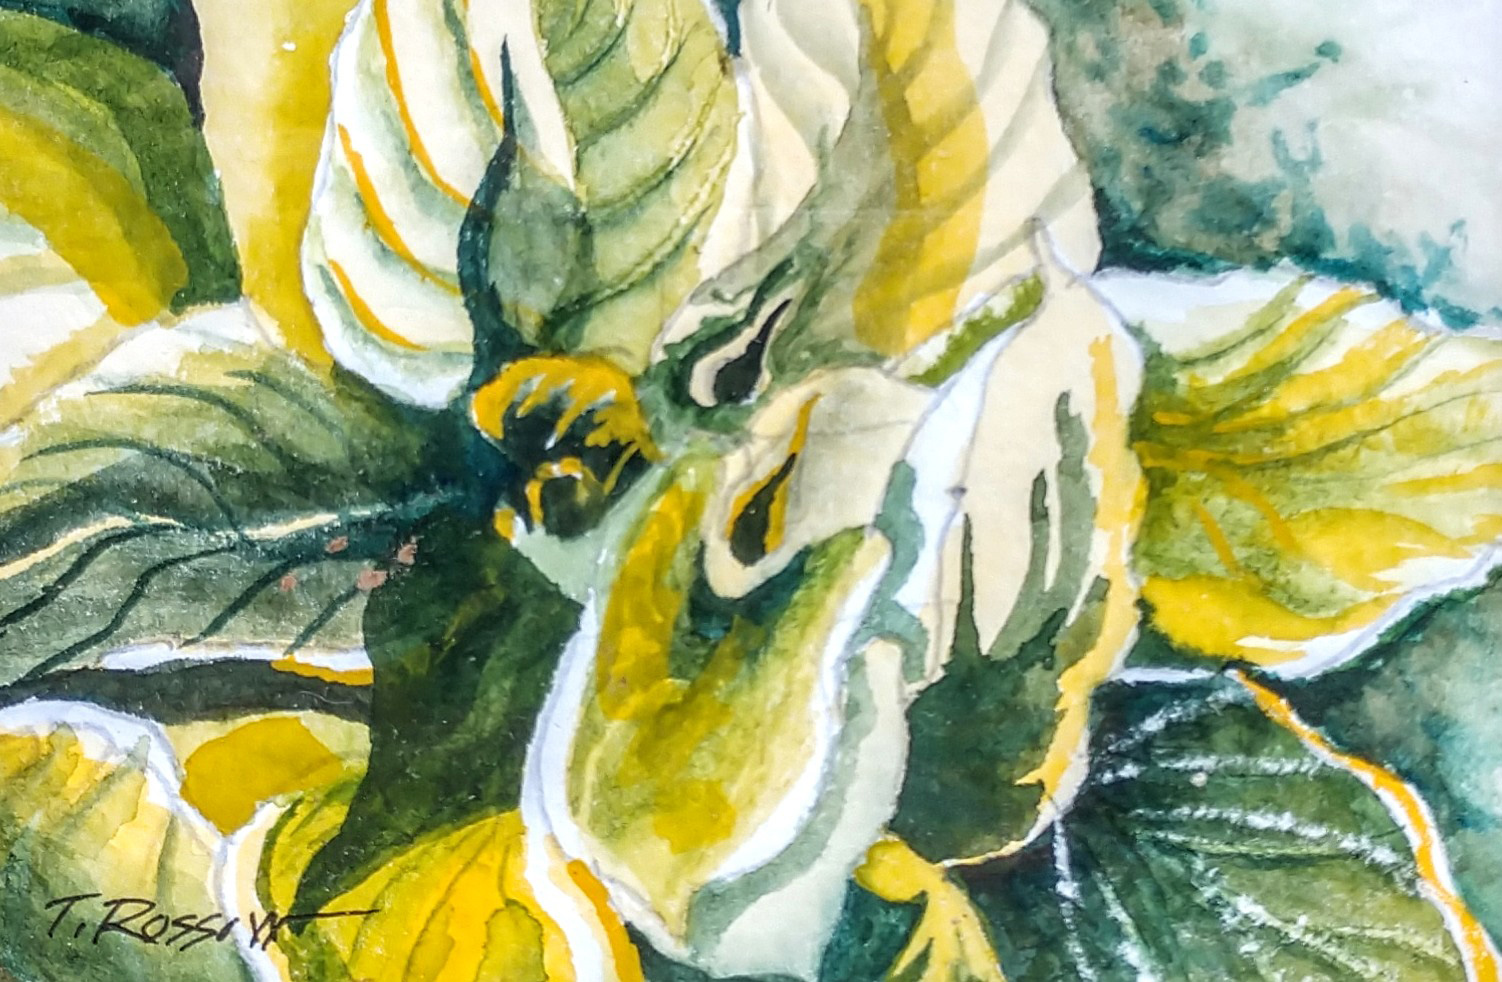 Hosta (top view), Watercolor on paper, 4.5 x 3